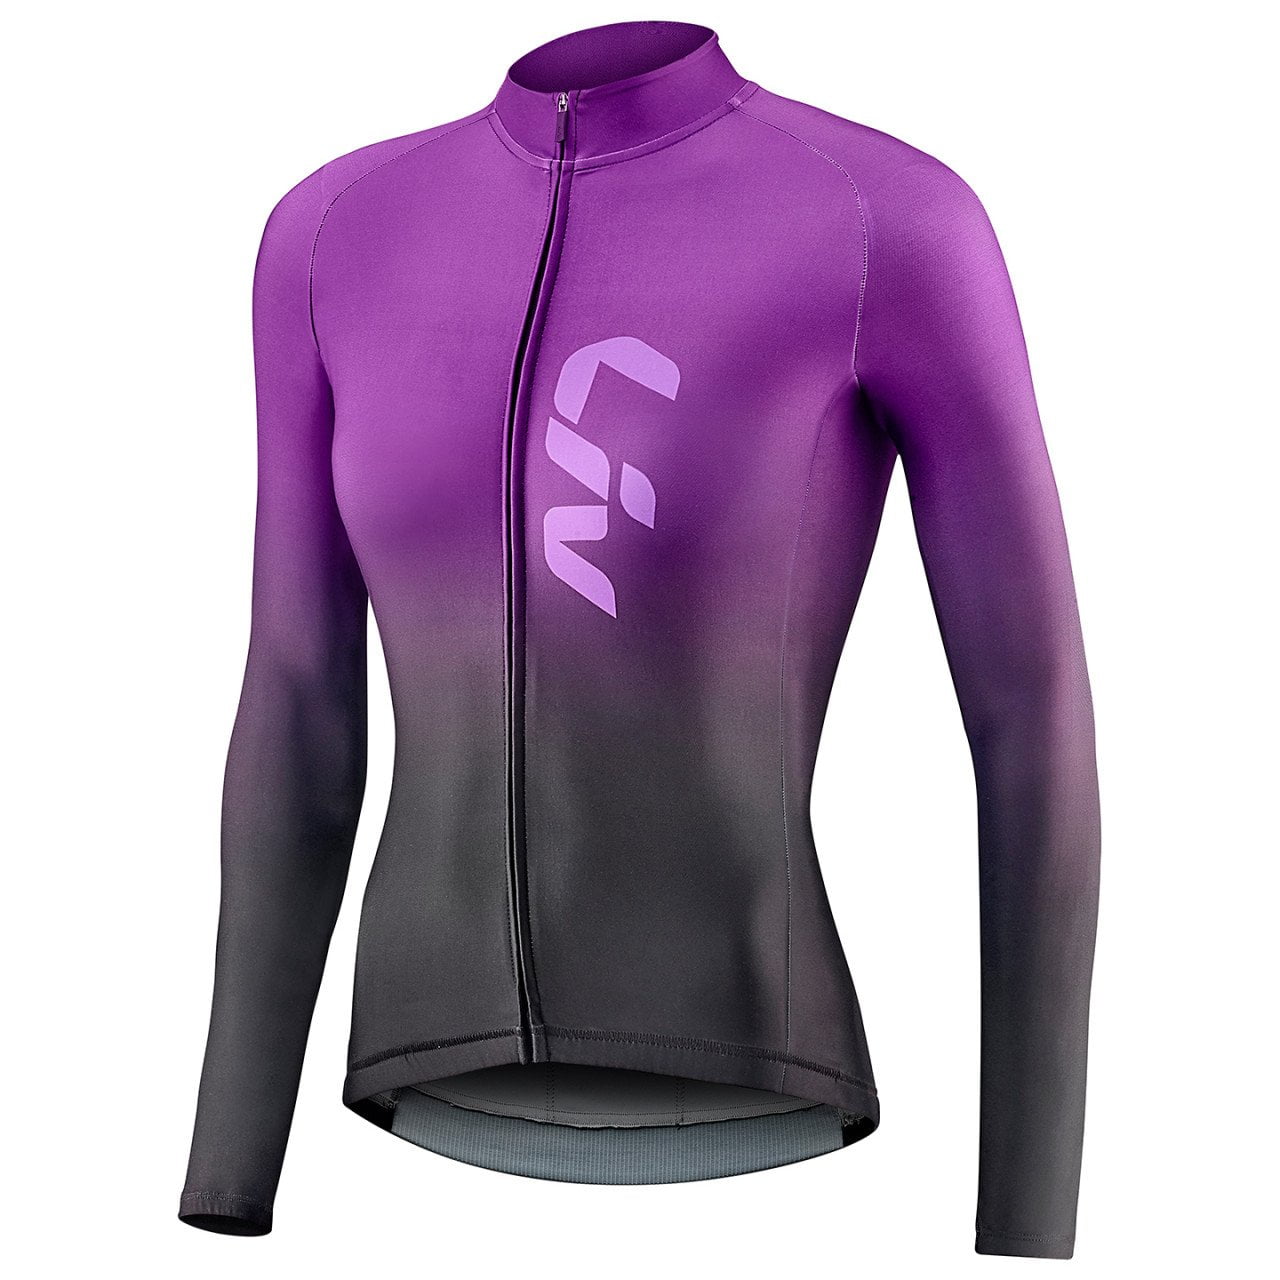 Maillot BTT mangas largas mujer Race Day